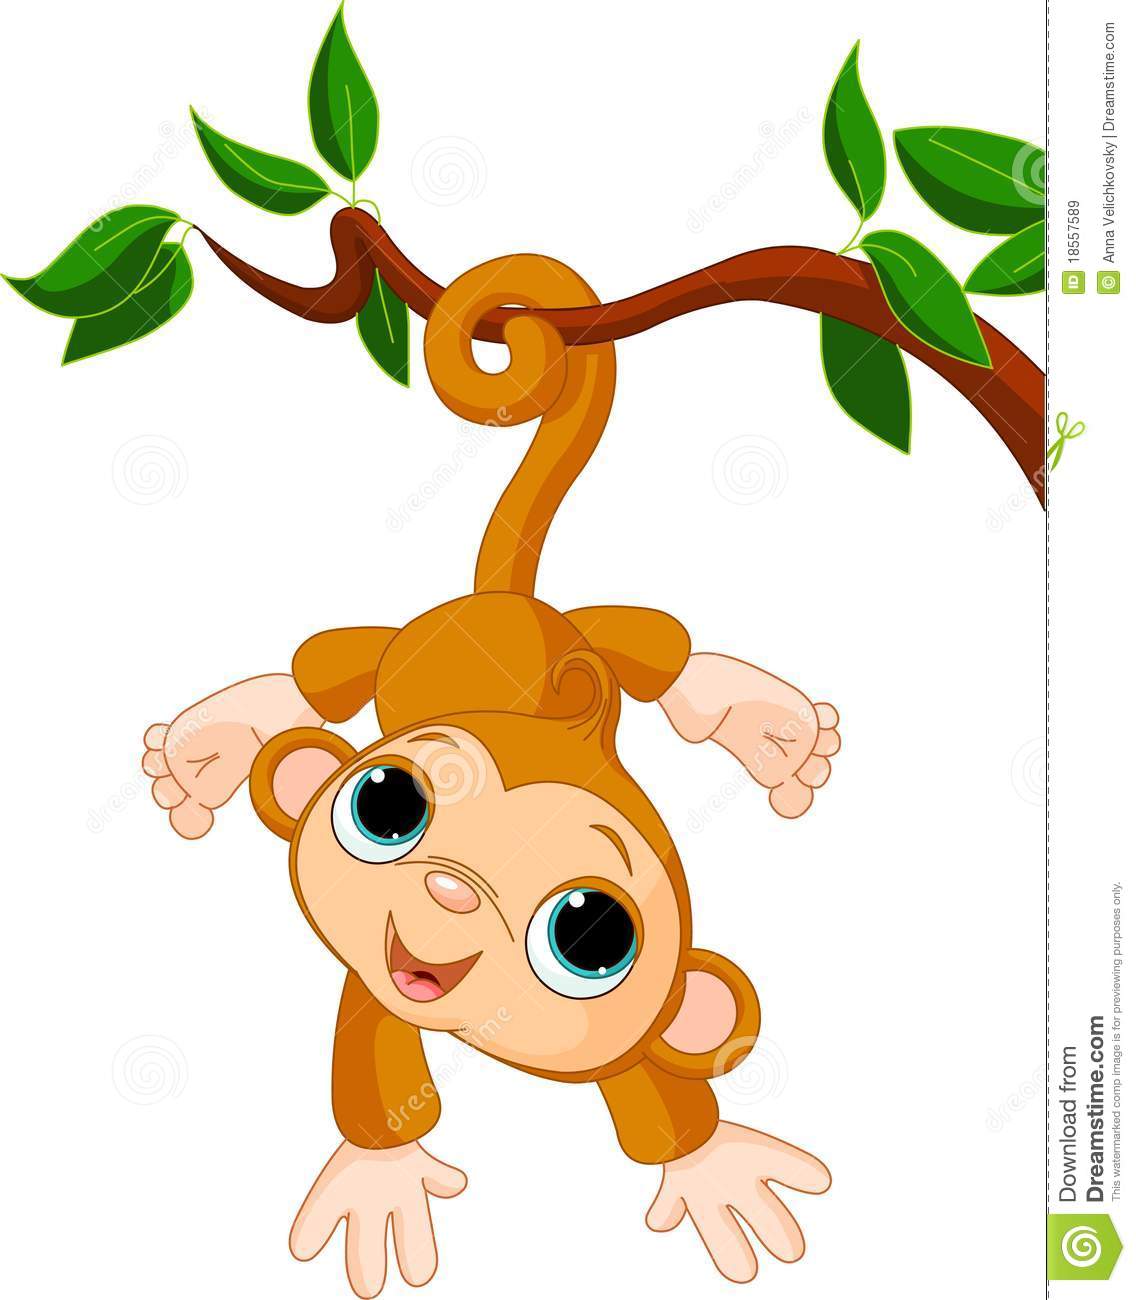 monkey in a tree clipart - Monkey Images Clip Art